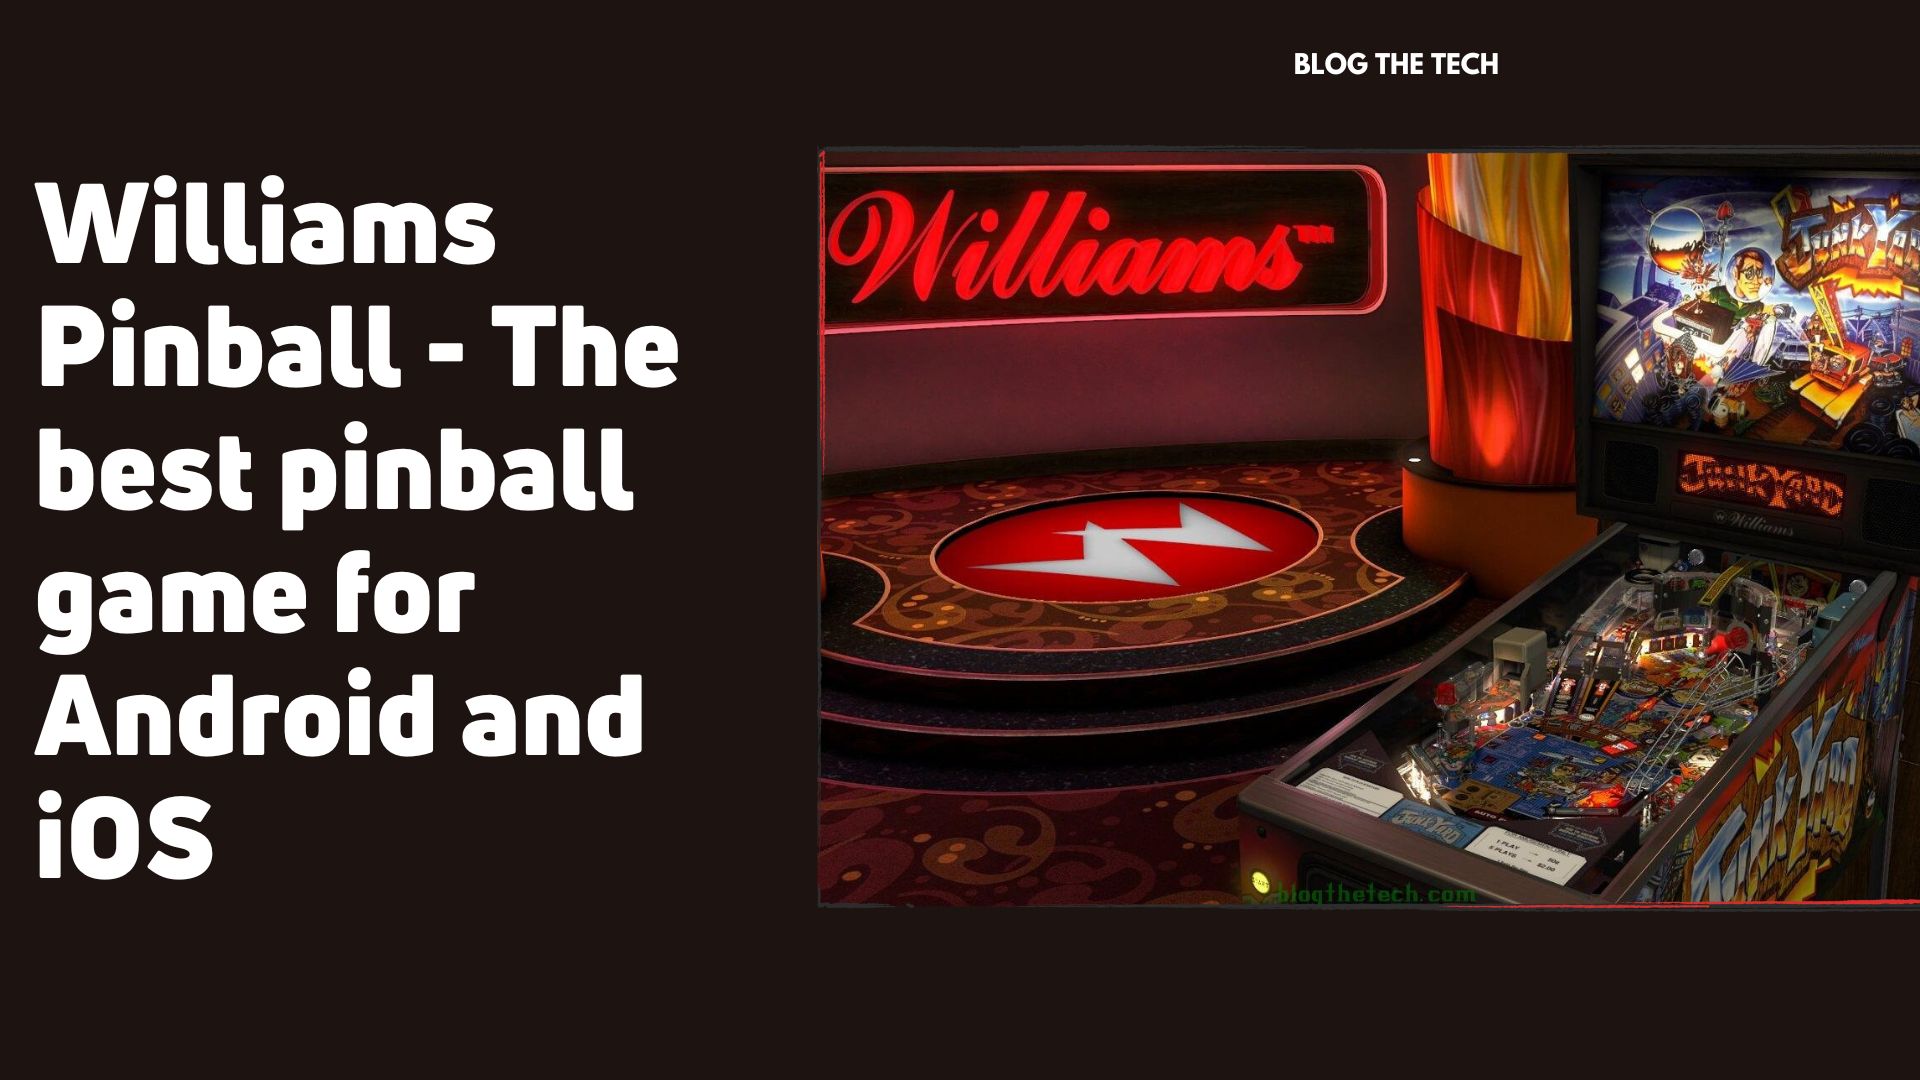 williams-pinball-the-best-pinball-game-for-android-and-ios